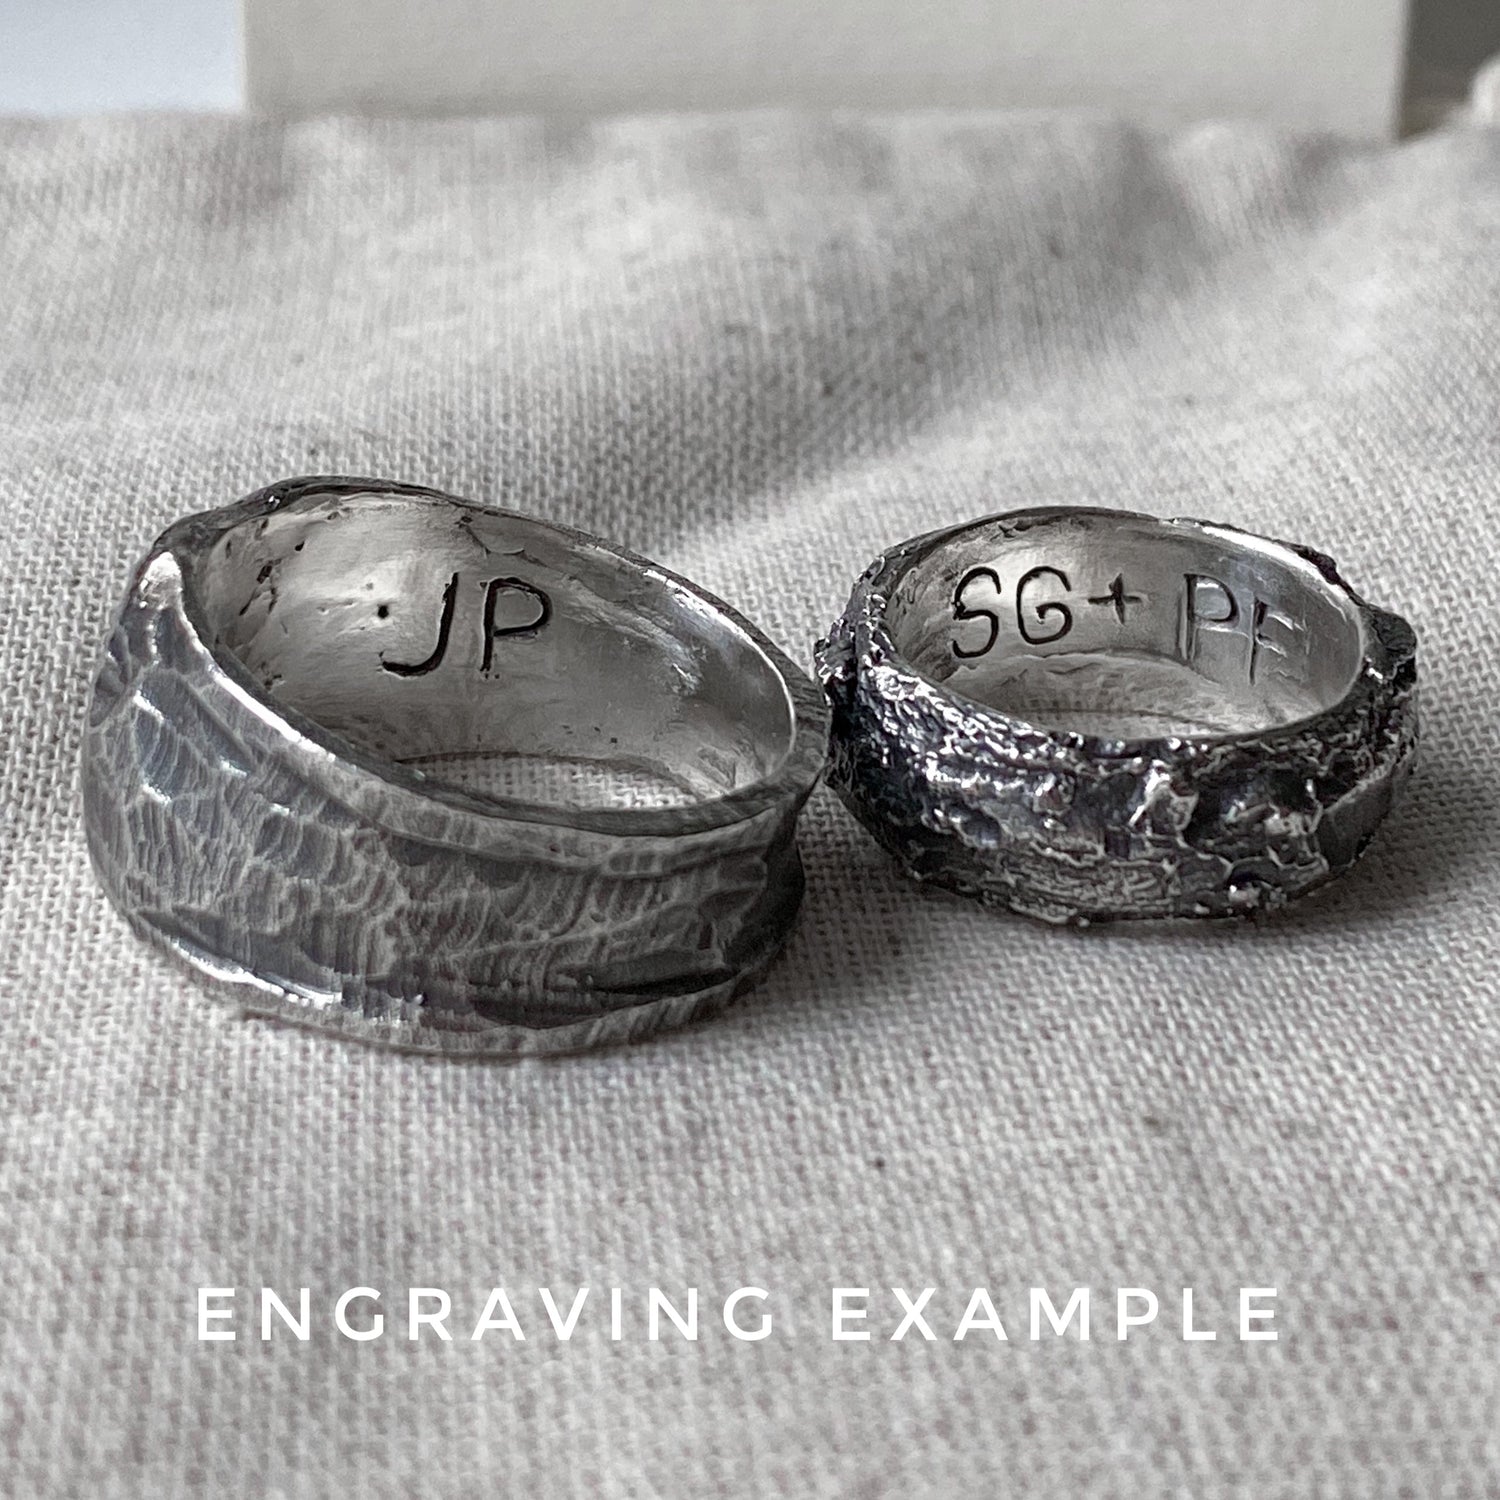 Stratum ring- a band ring with an unusual multi-layered texture Band rings Project50g 